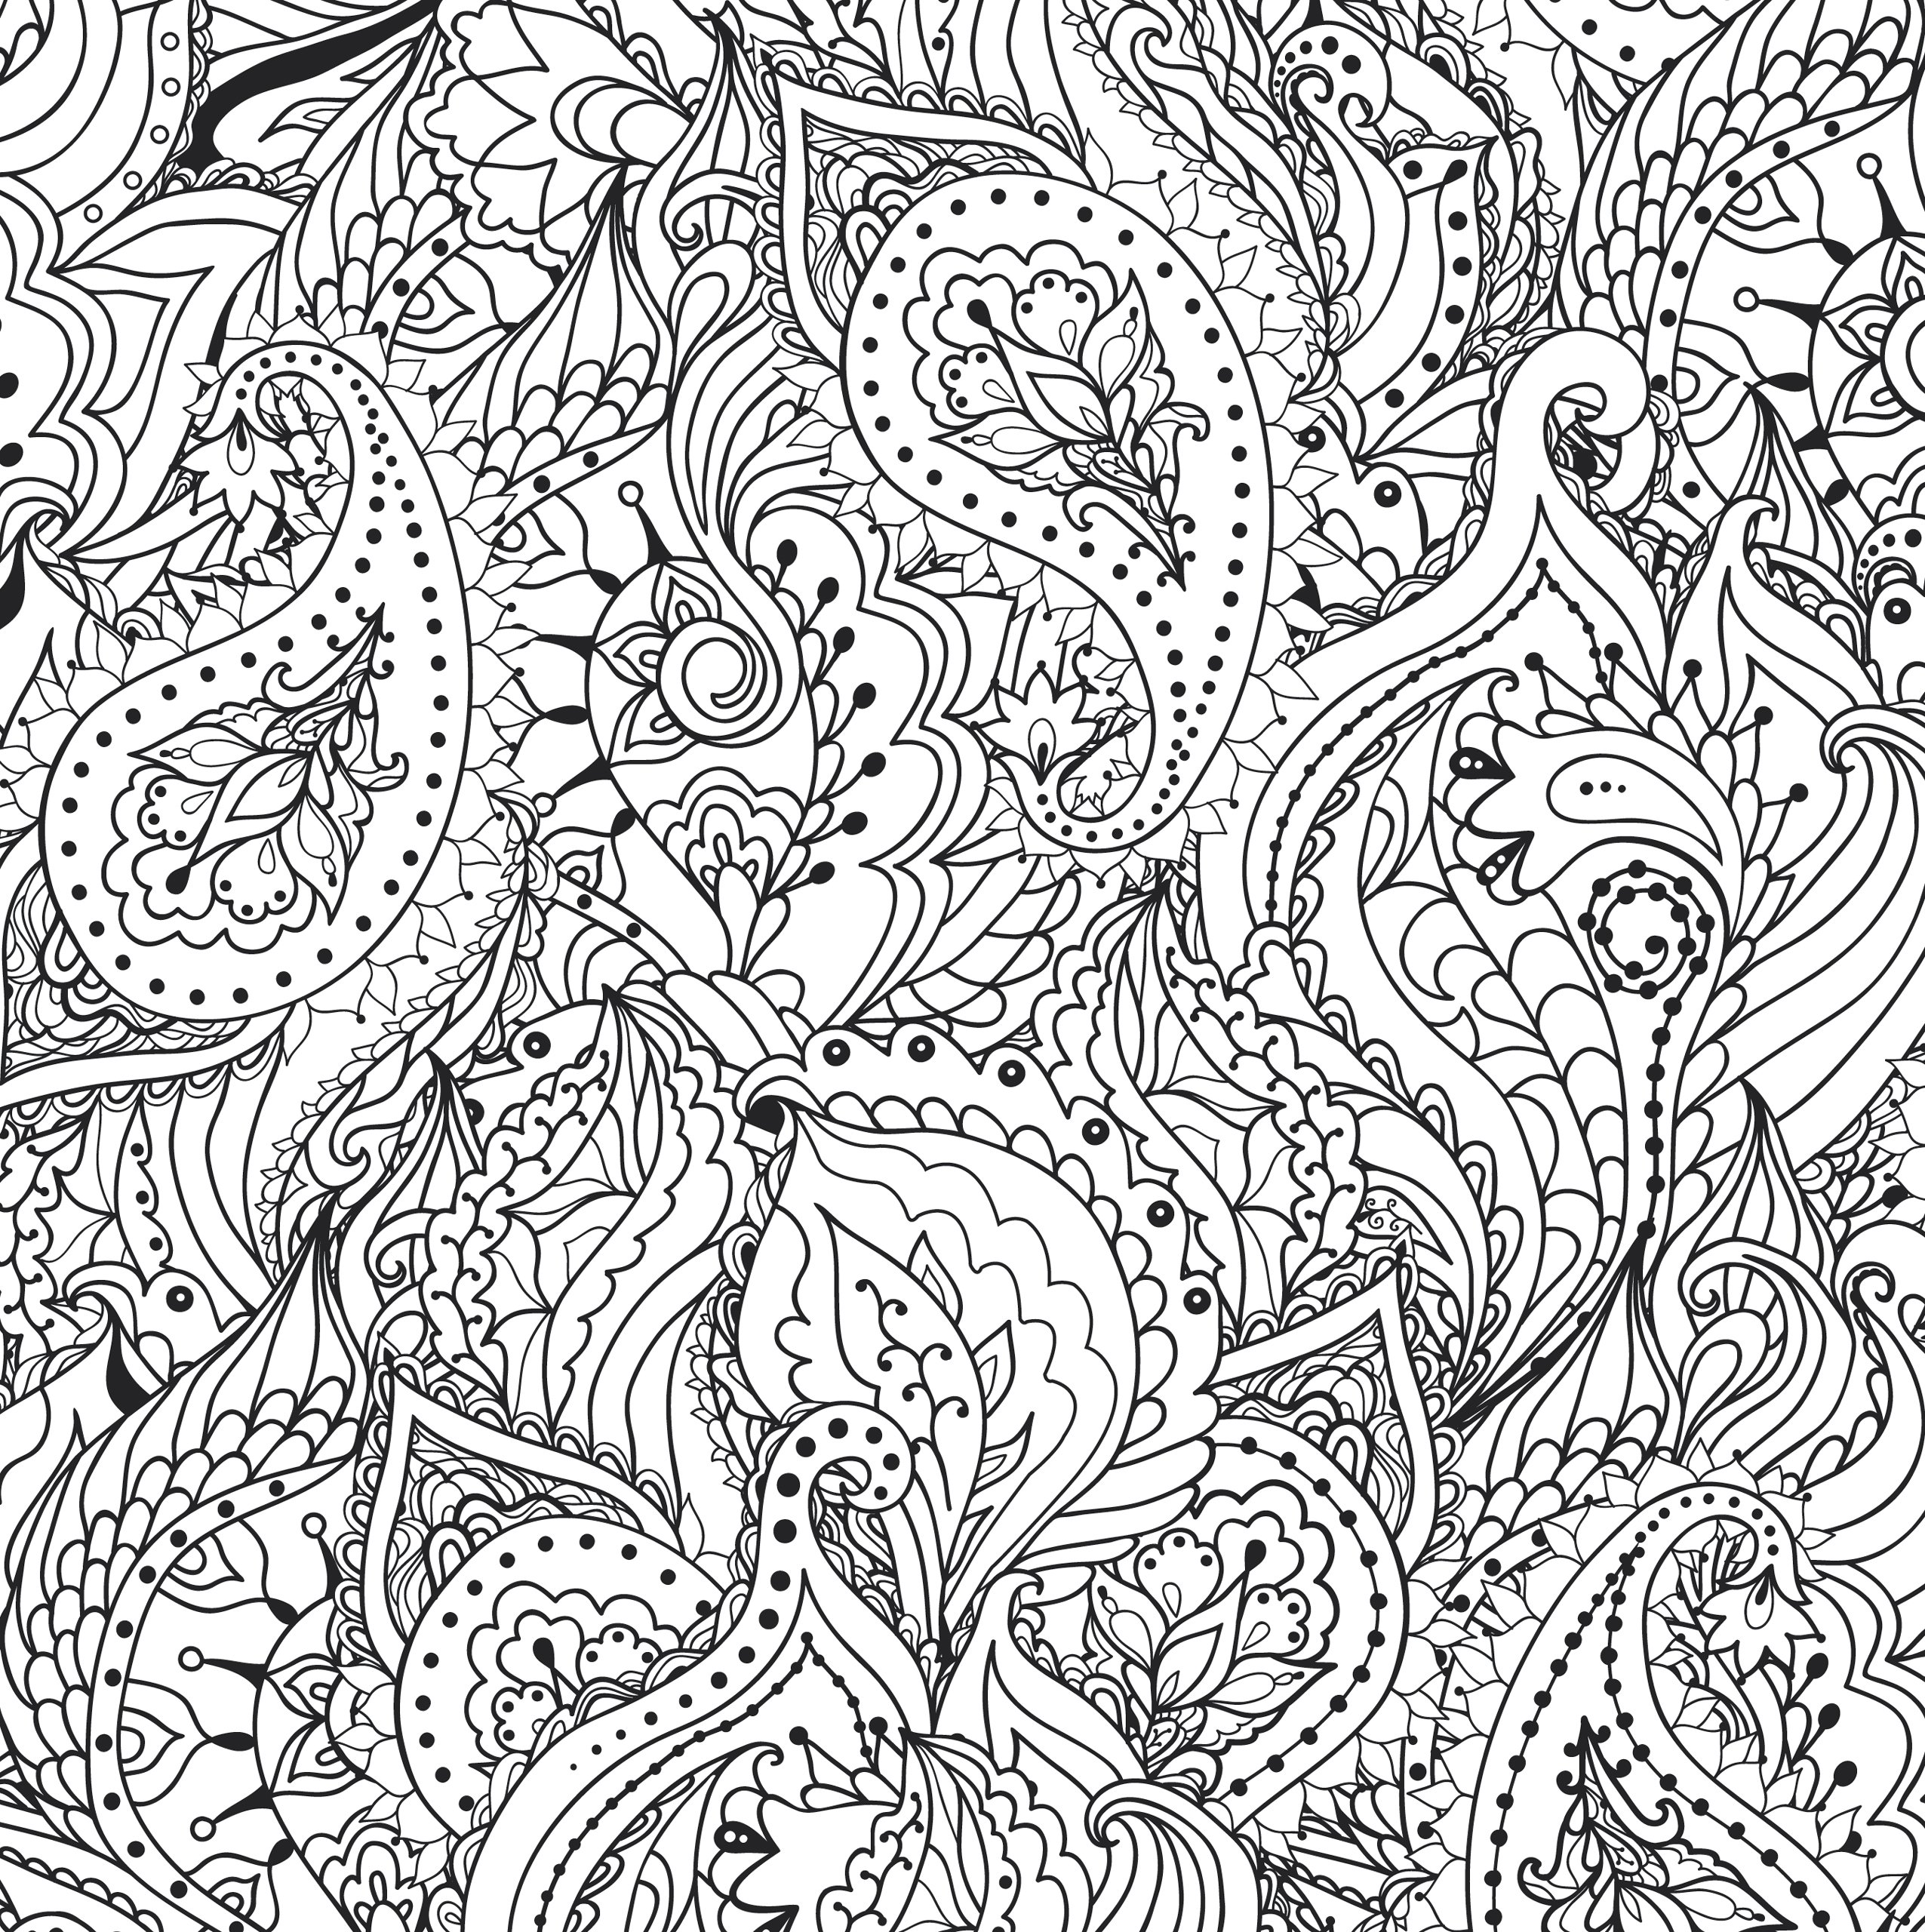 Download Peaceful Paisleys Adult Coloring Book - A2Z Science & Learning Toy Store